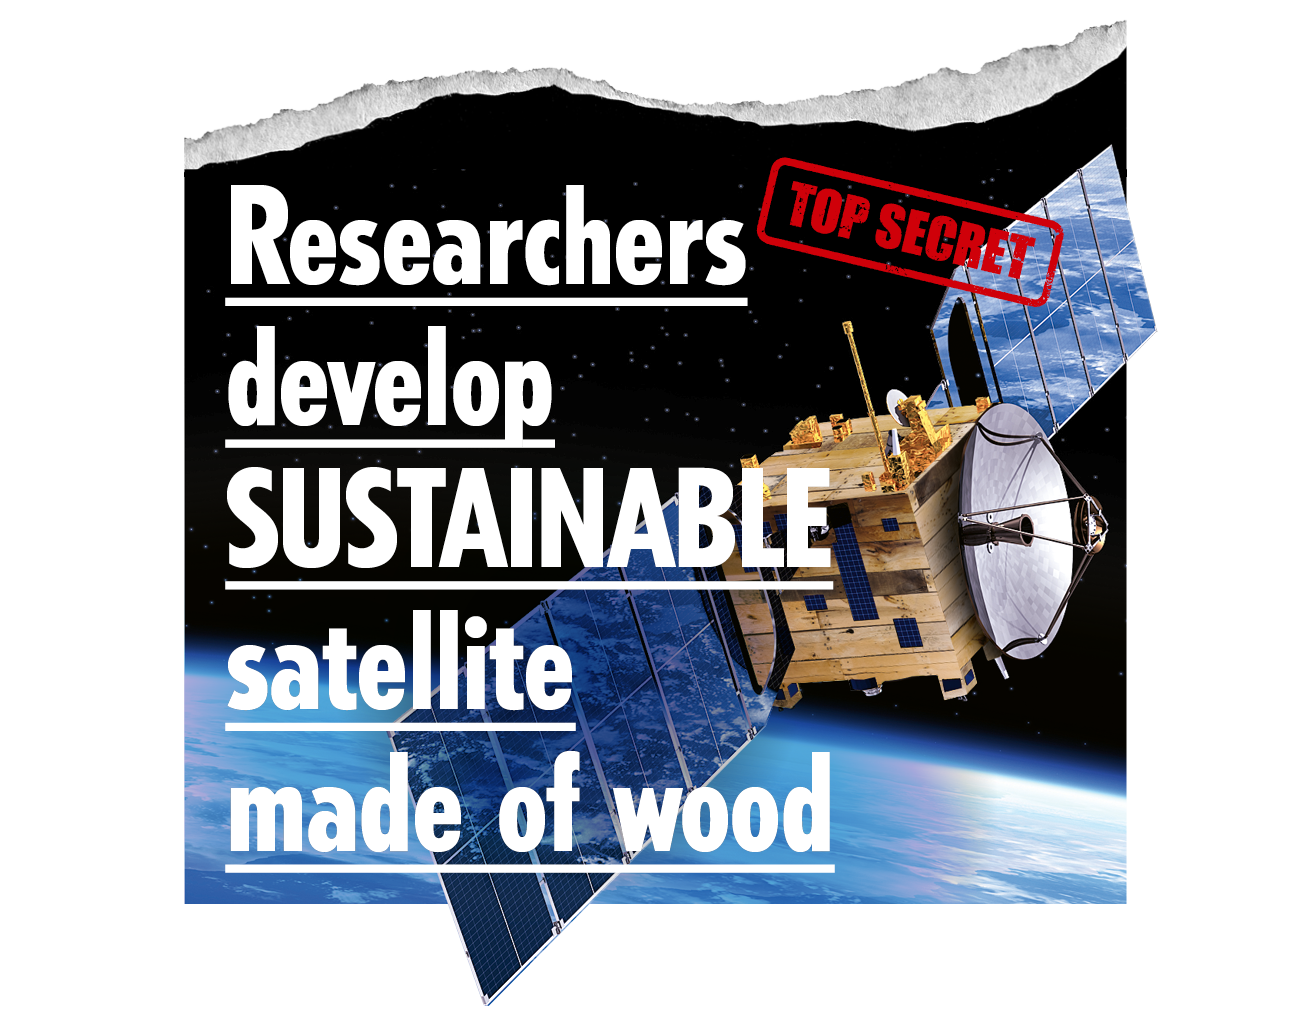 Researchers develop sustainable satellite made of wood